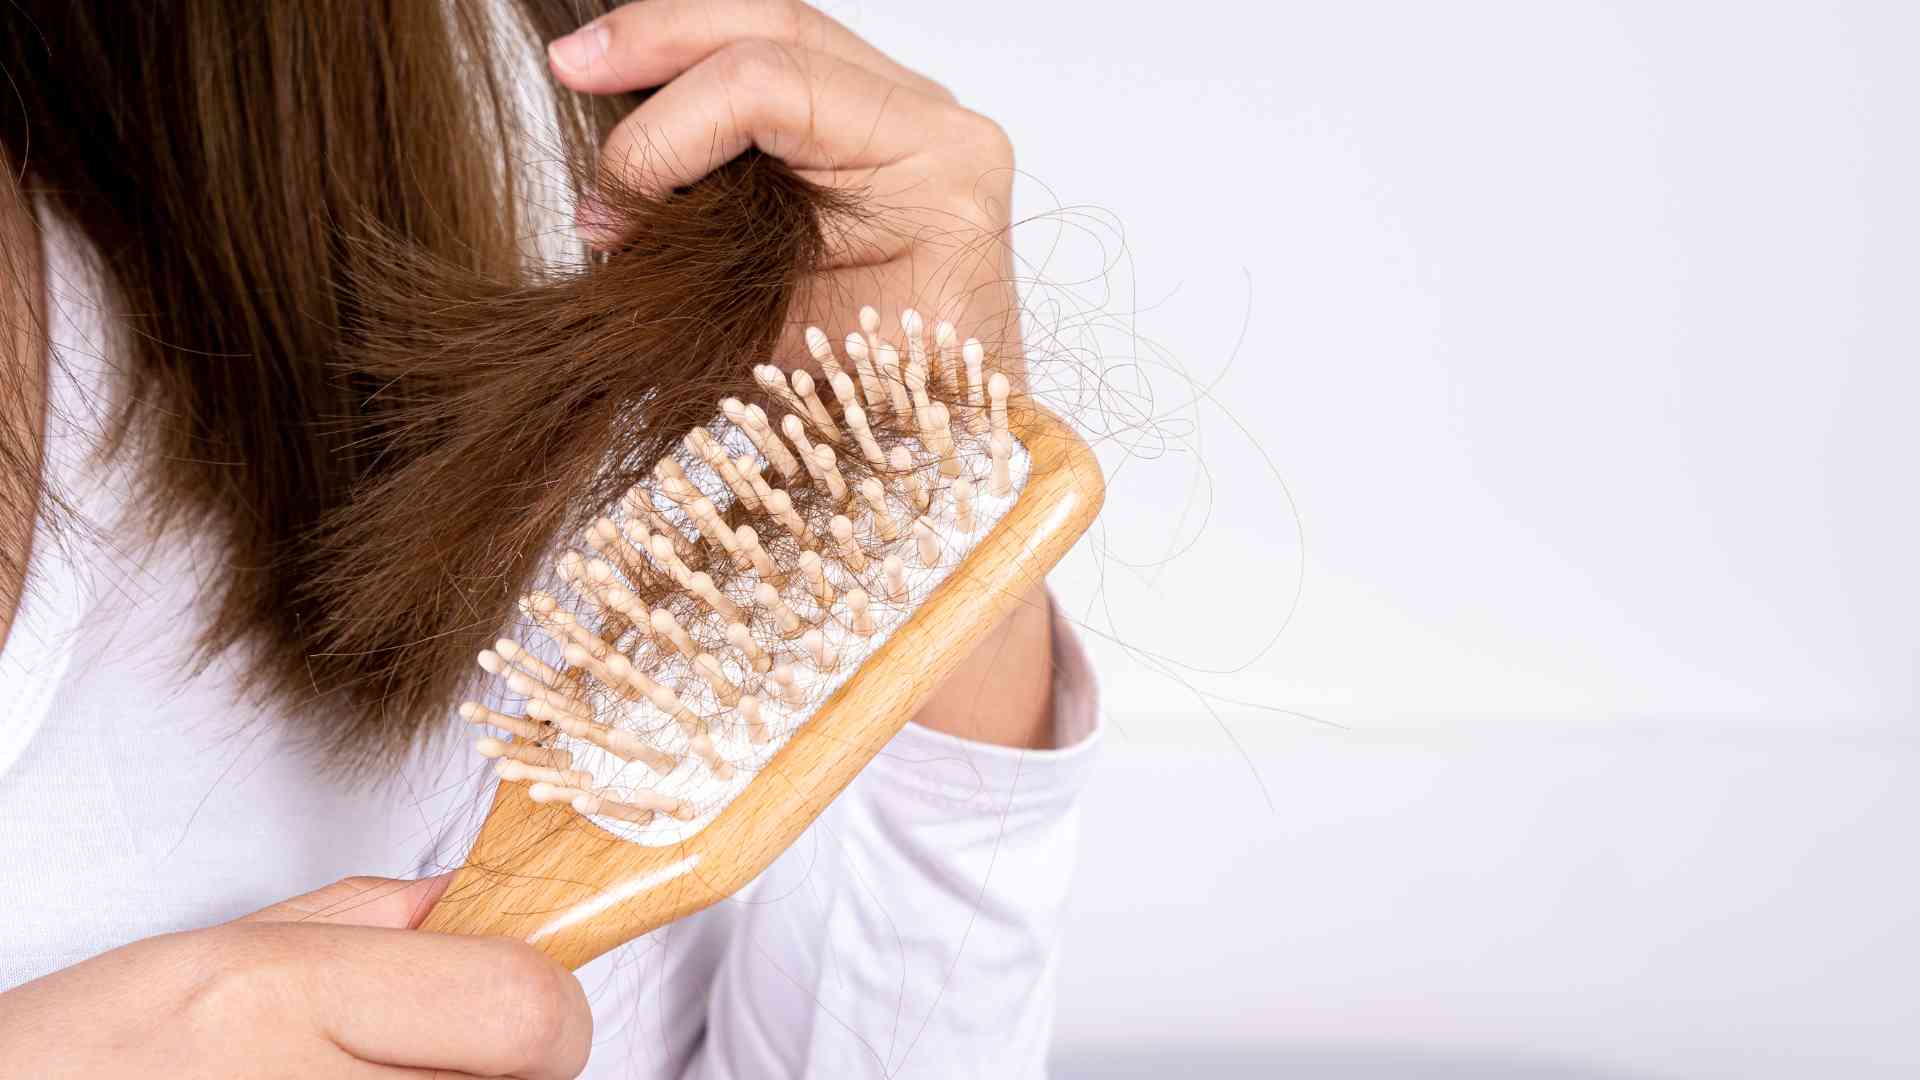 Can you explain the connection between hormonal changes and hair loss